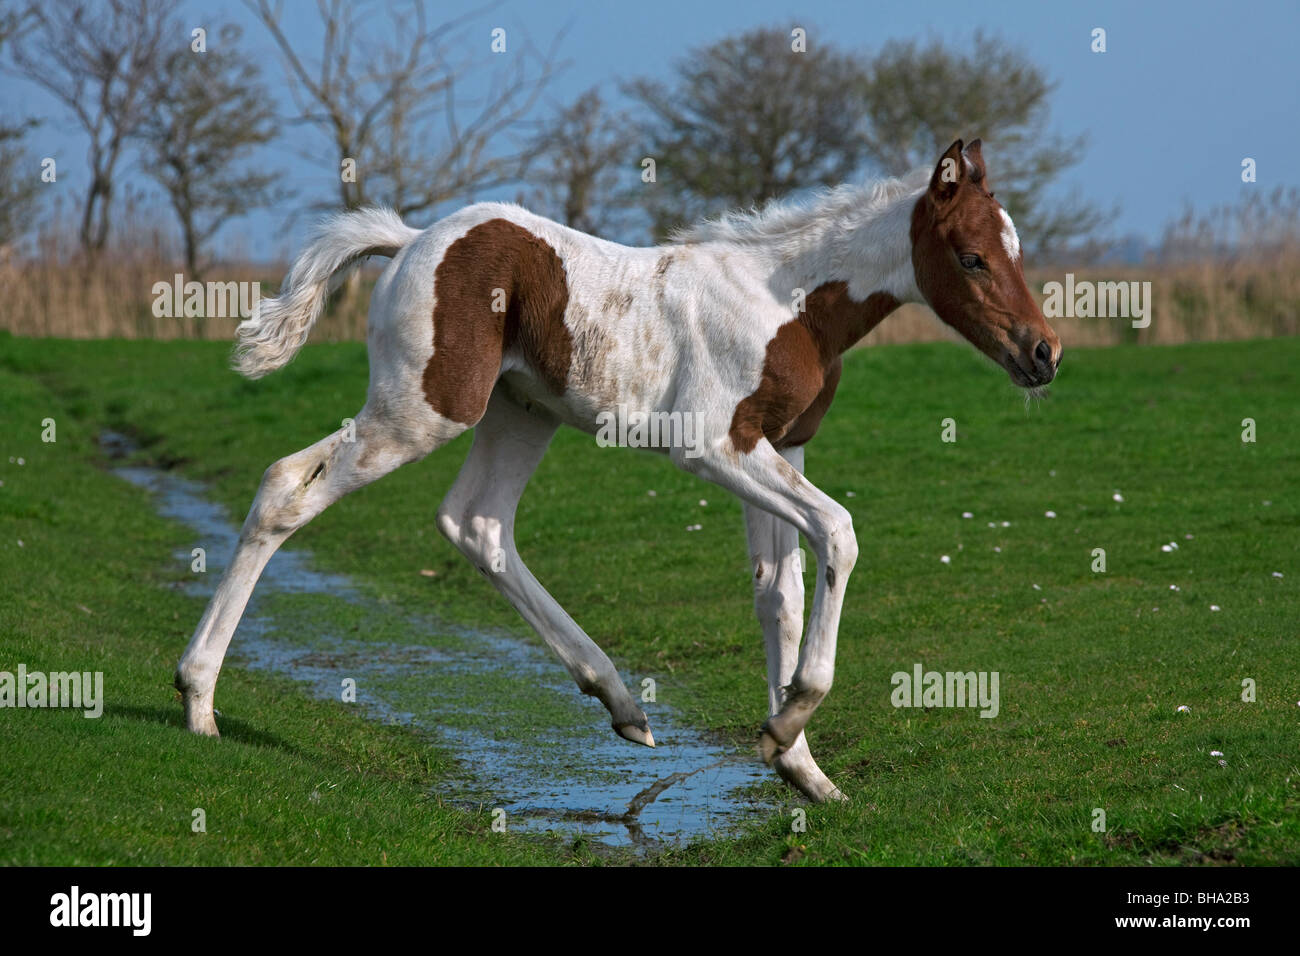 Horse (Equus caballus) foal running in field, Germany Stock Photo